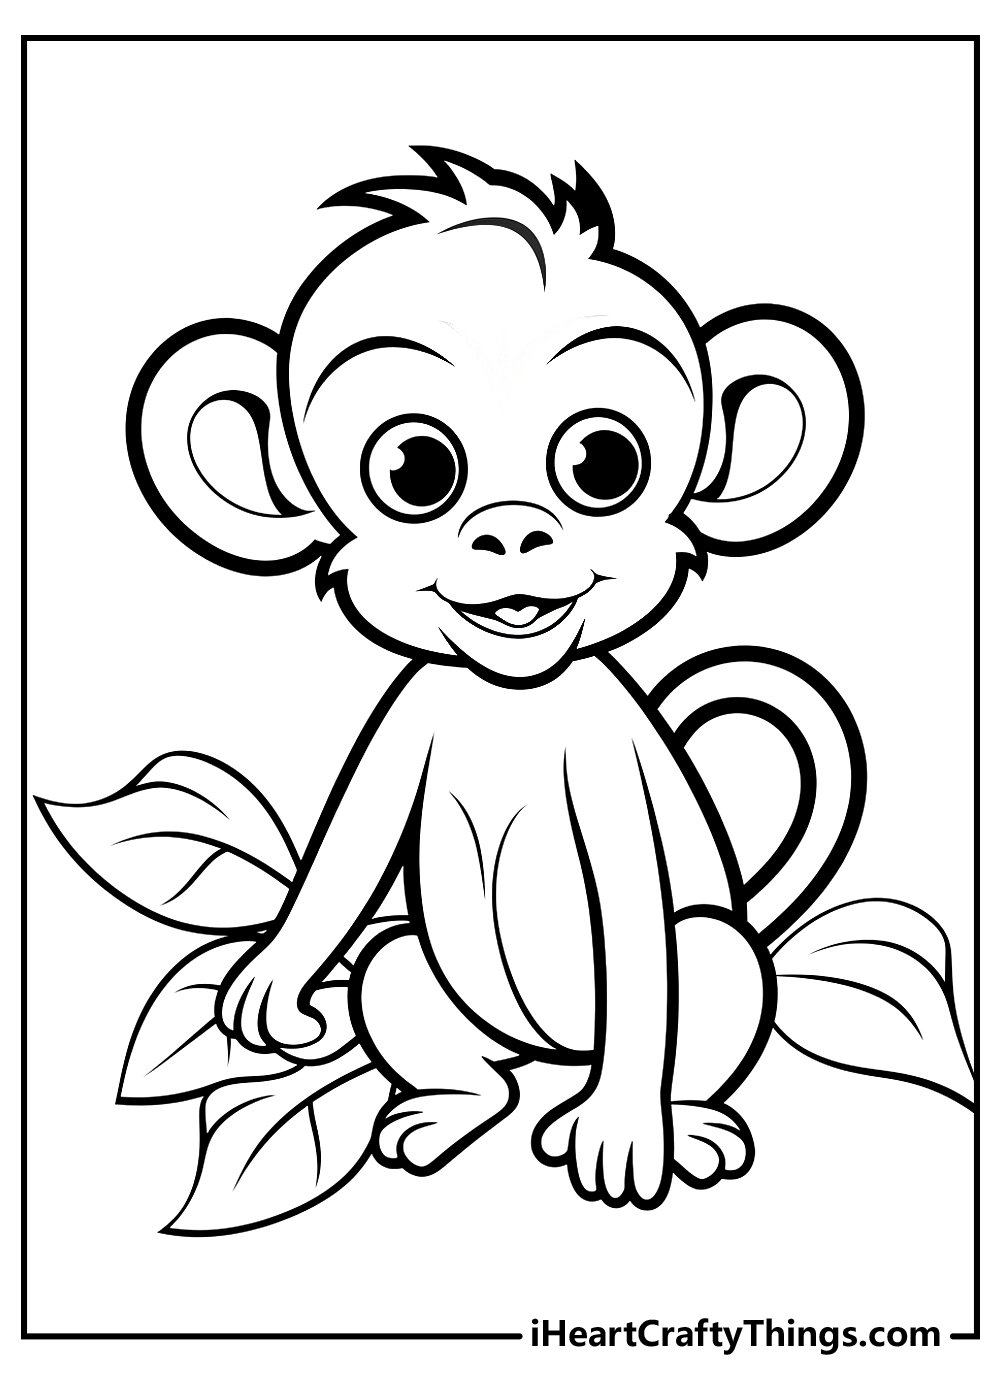 original monkey coloring pages